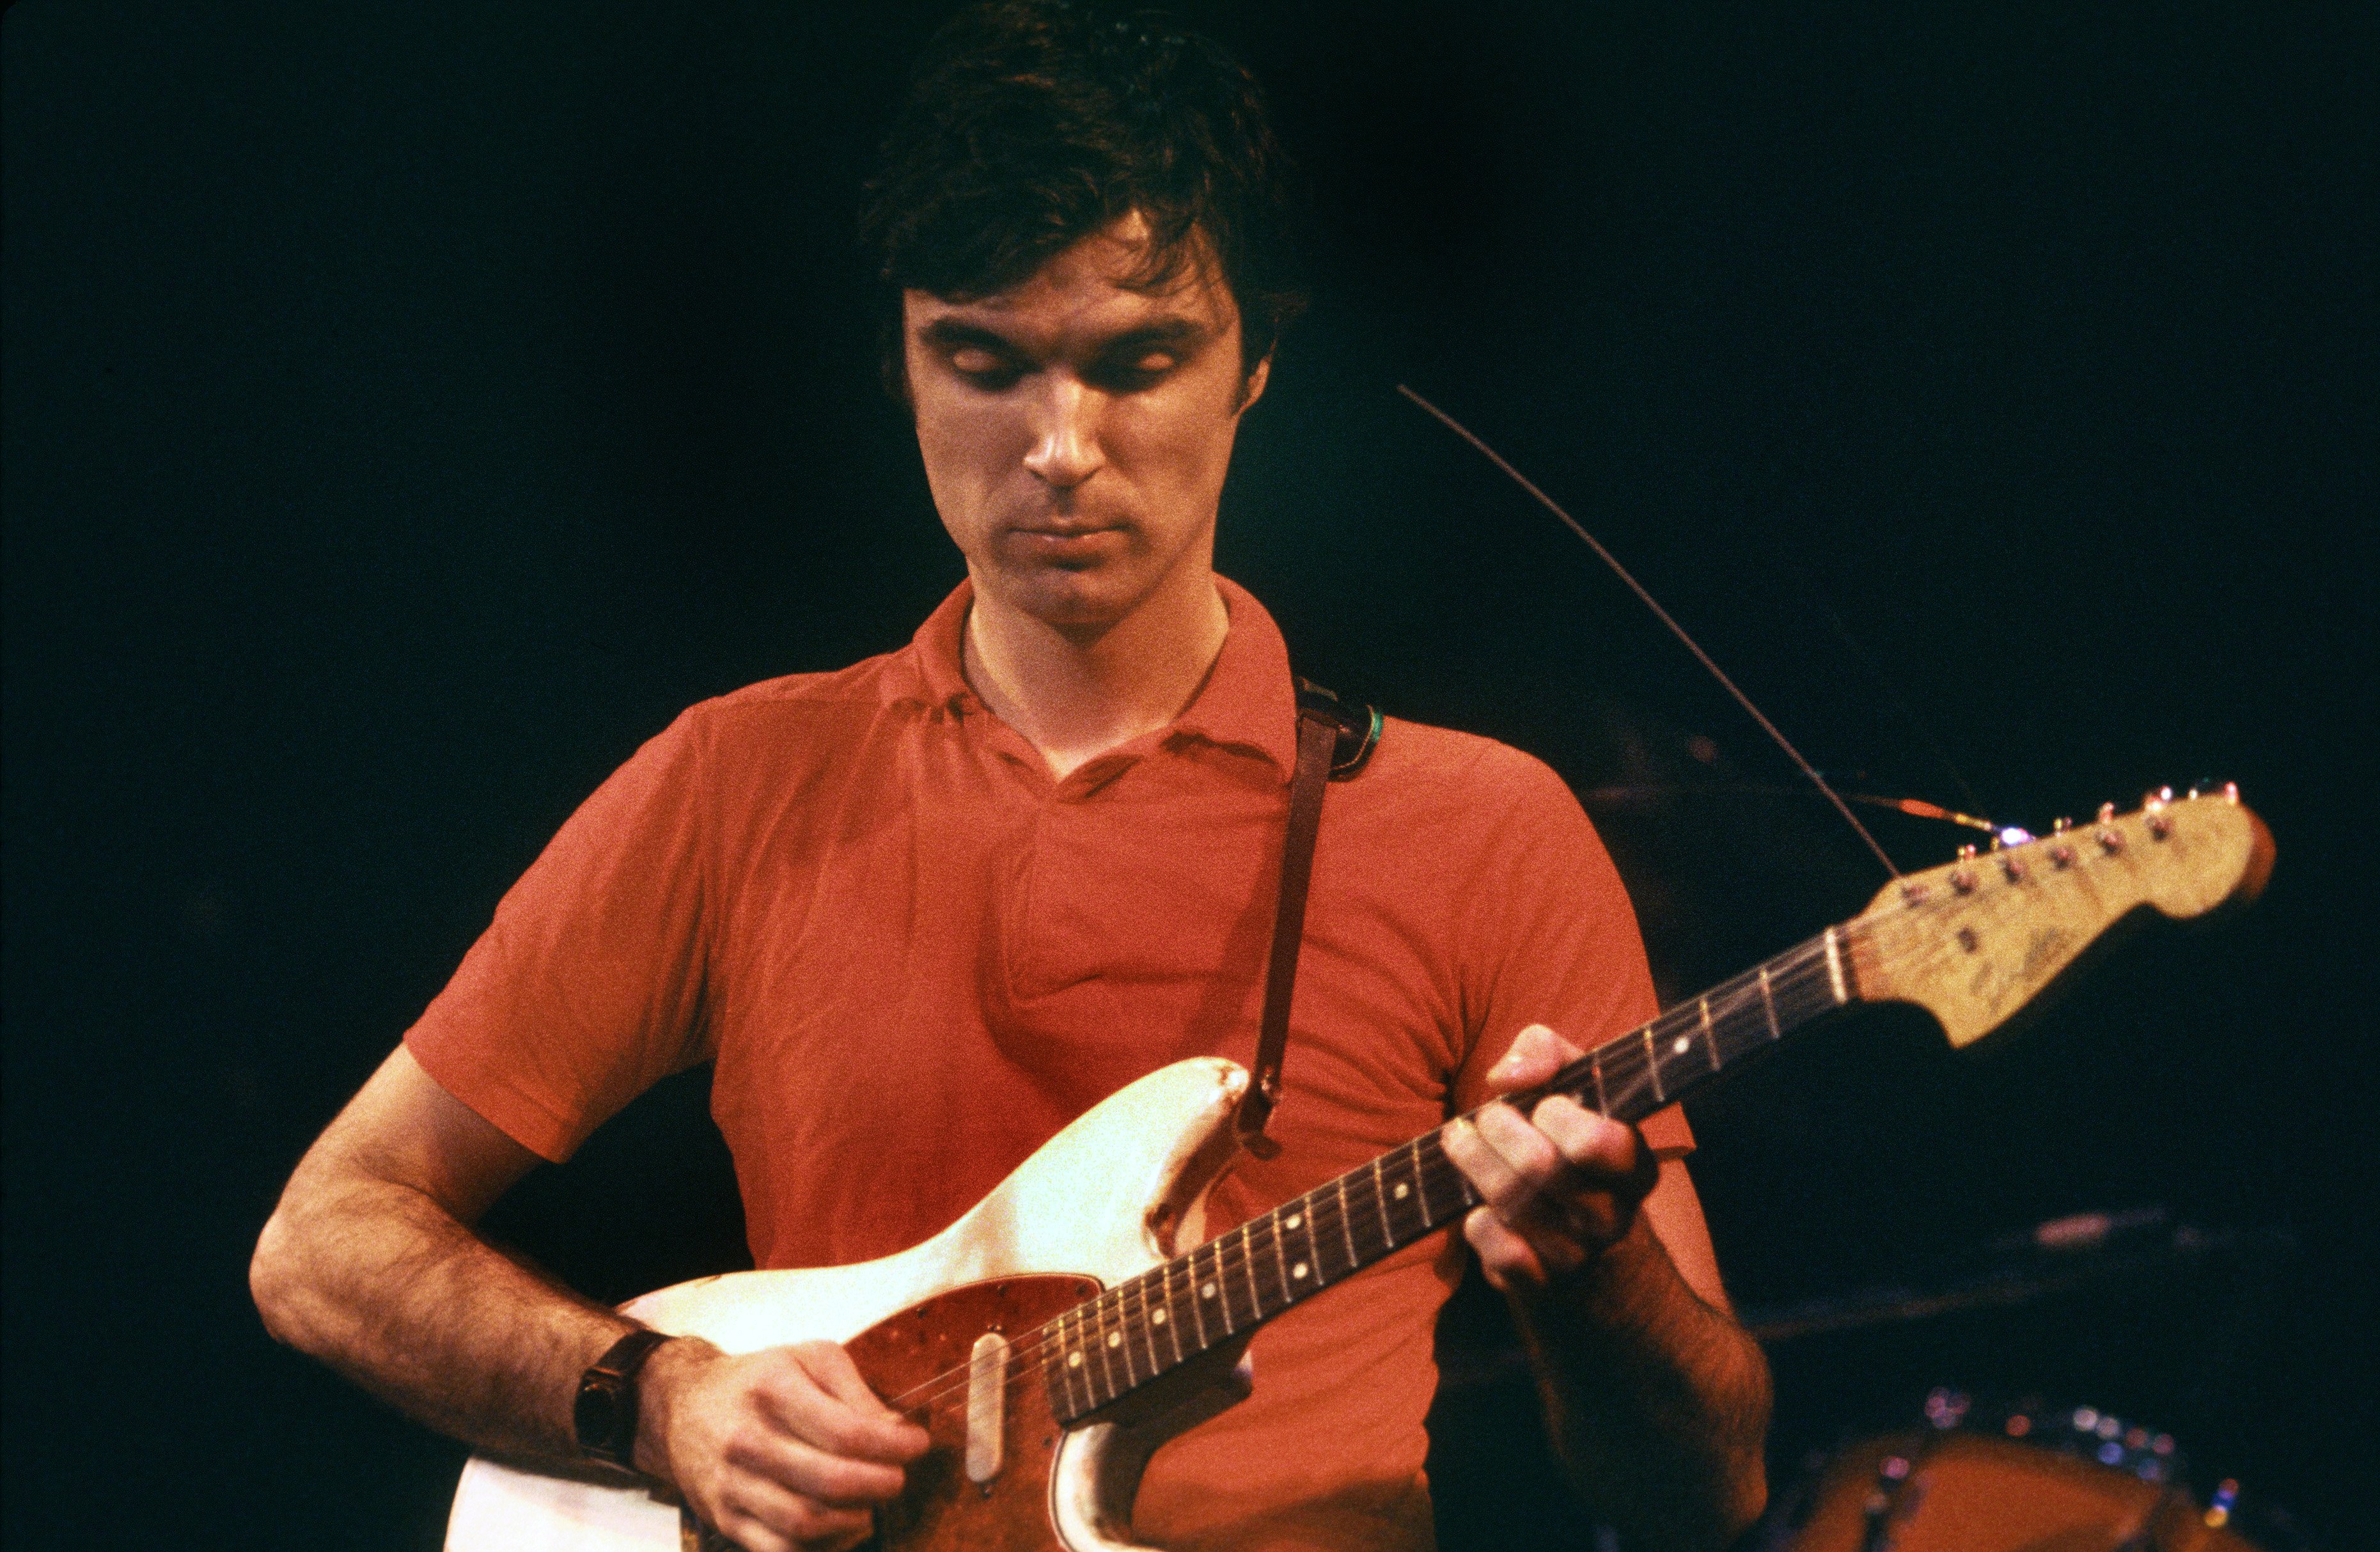 Dumbarton-born David Byrne performs in Hollywood, California, in the early 1980s.